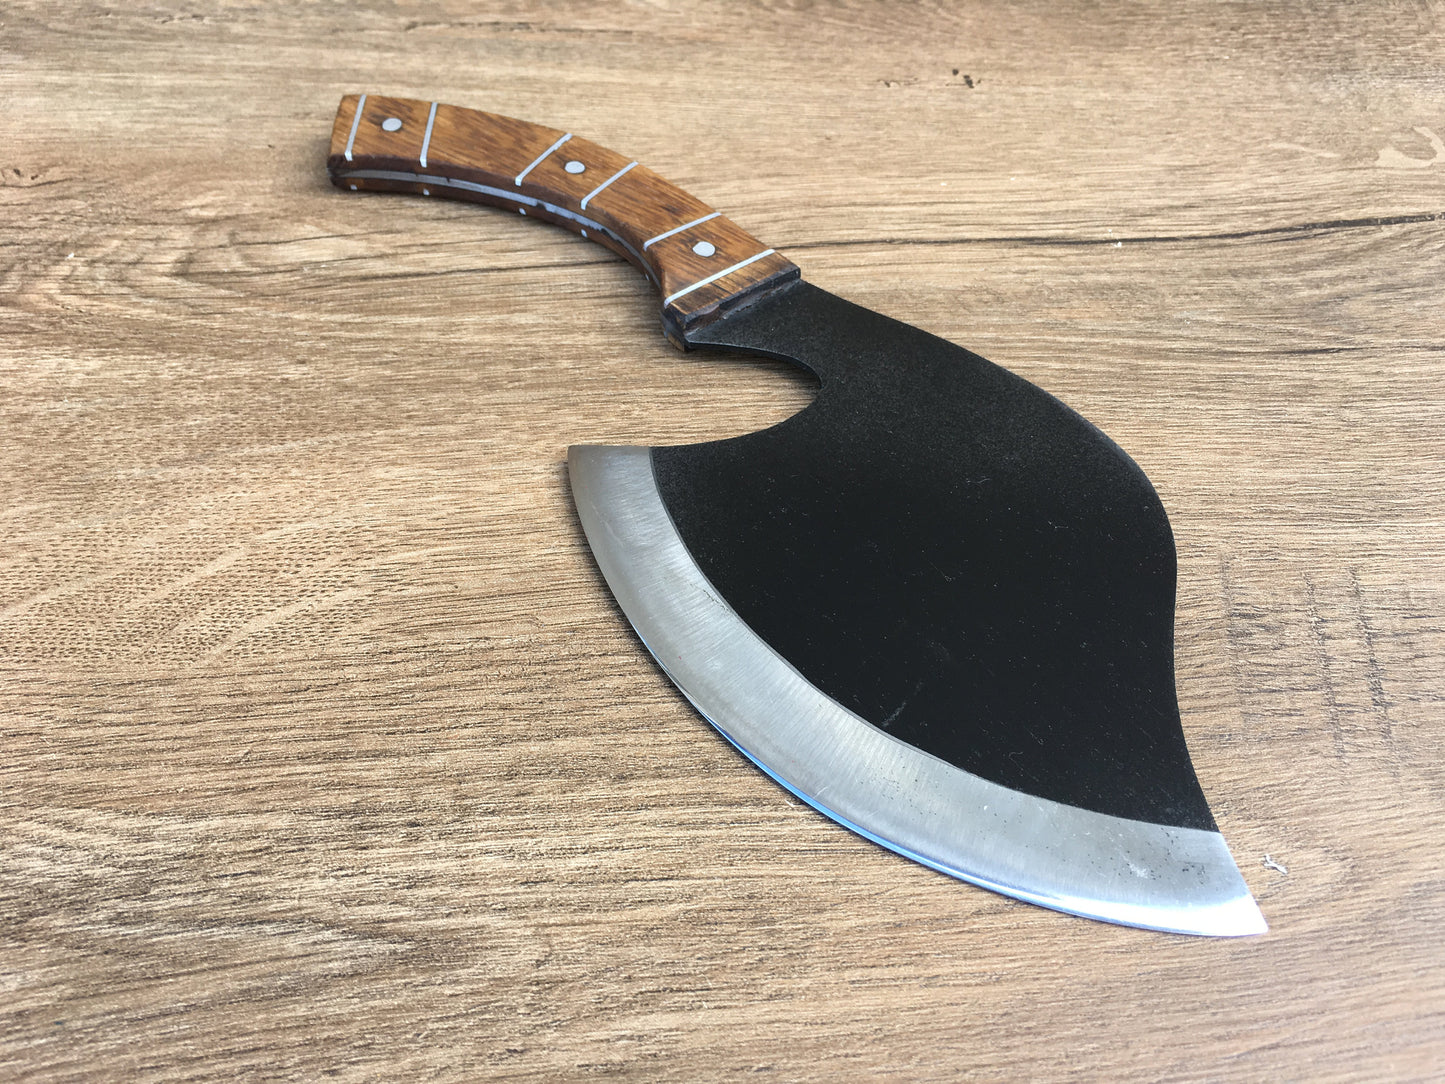 Cleaver knife, kitchen cleaver, meat cleaver, meat chopper, butcher's knife, kitchen axe, kitchen knife, viking knife, viking axe, chef gift